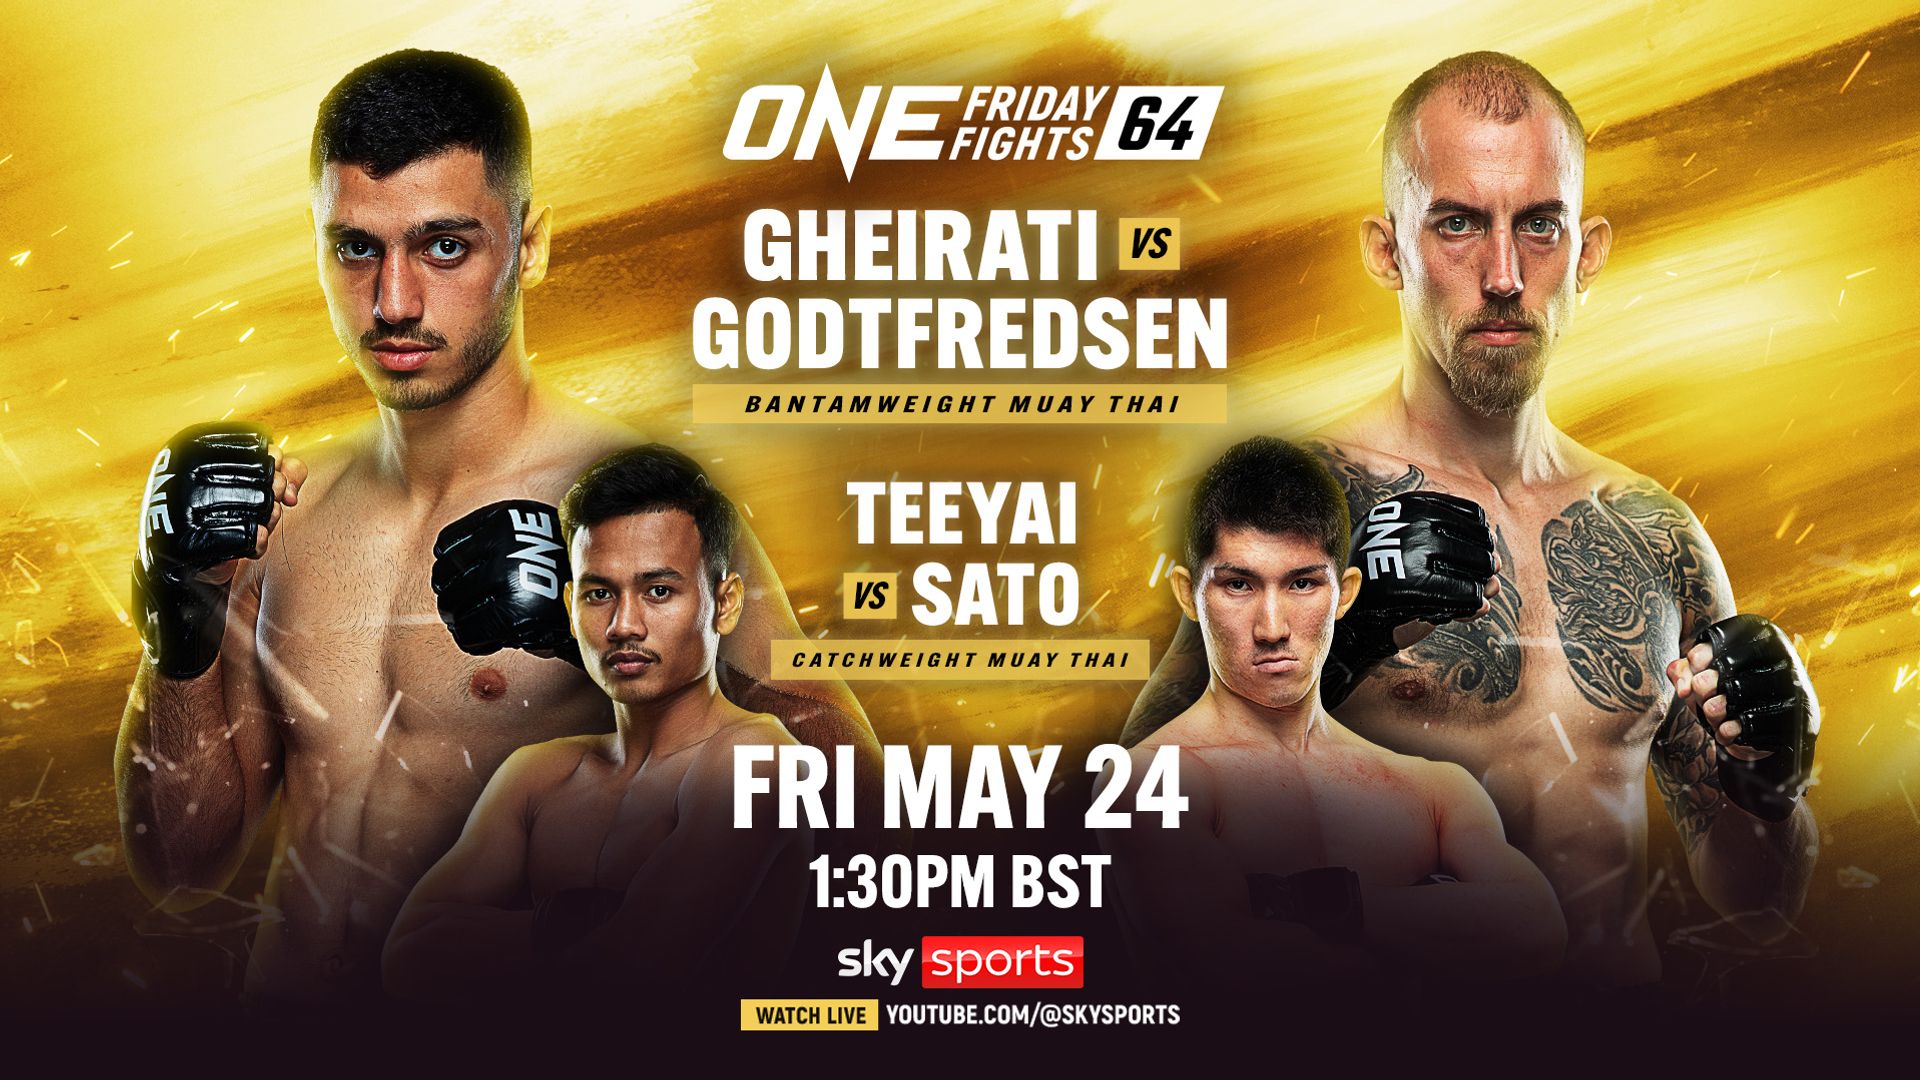 LIVE STREAM: ONE Friday Fights 64